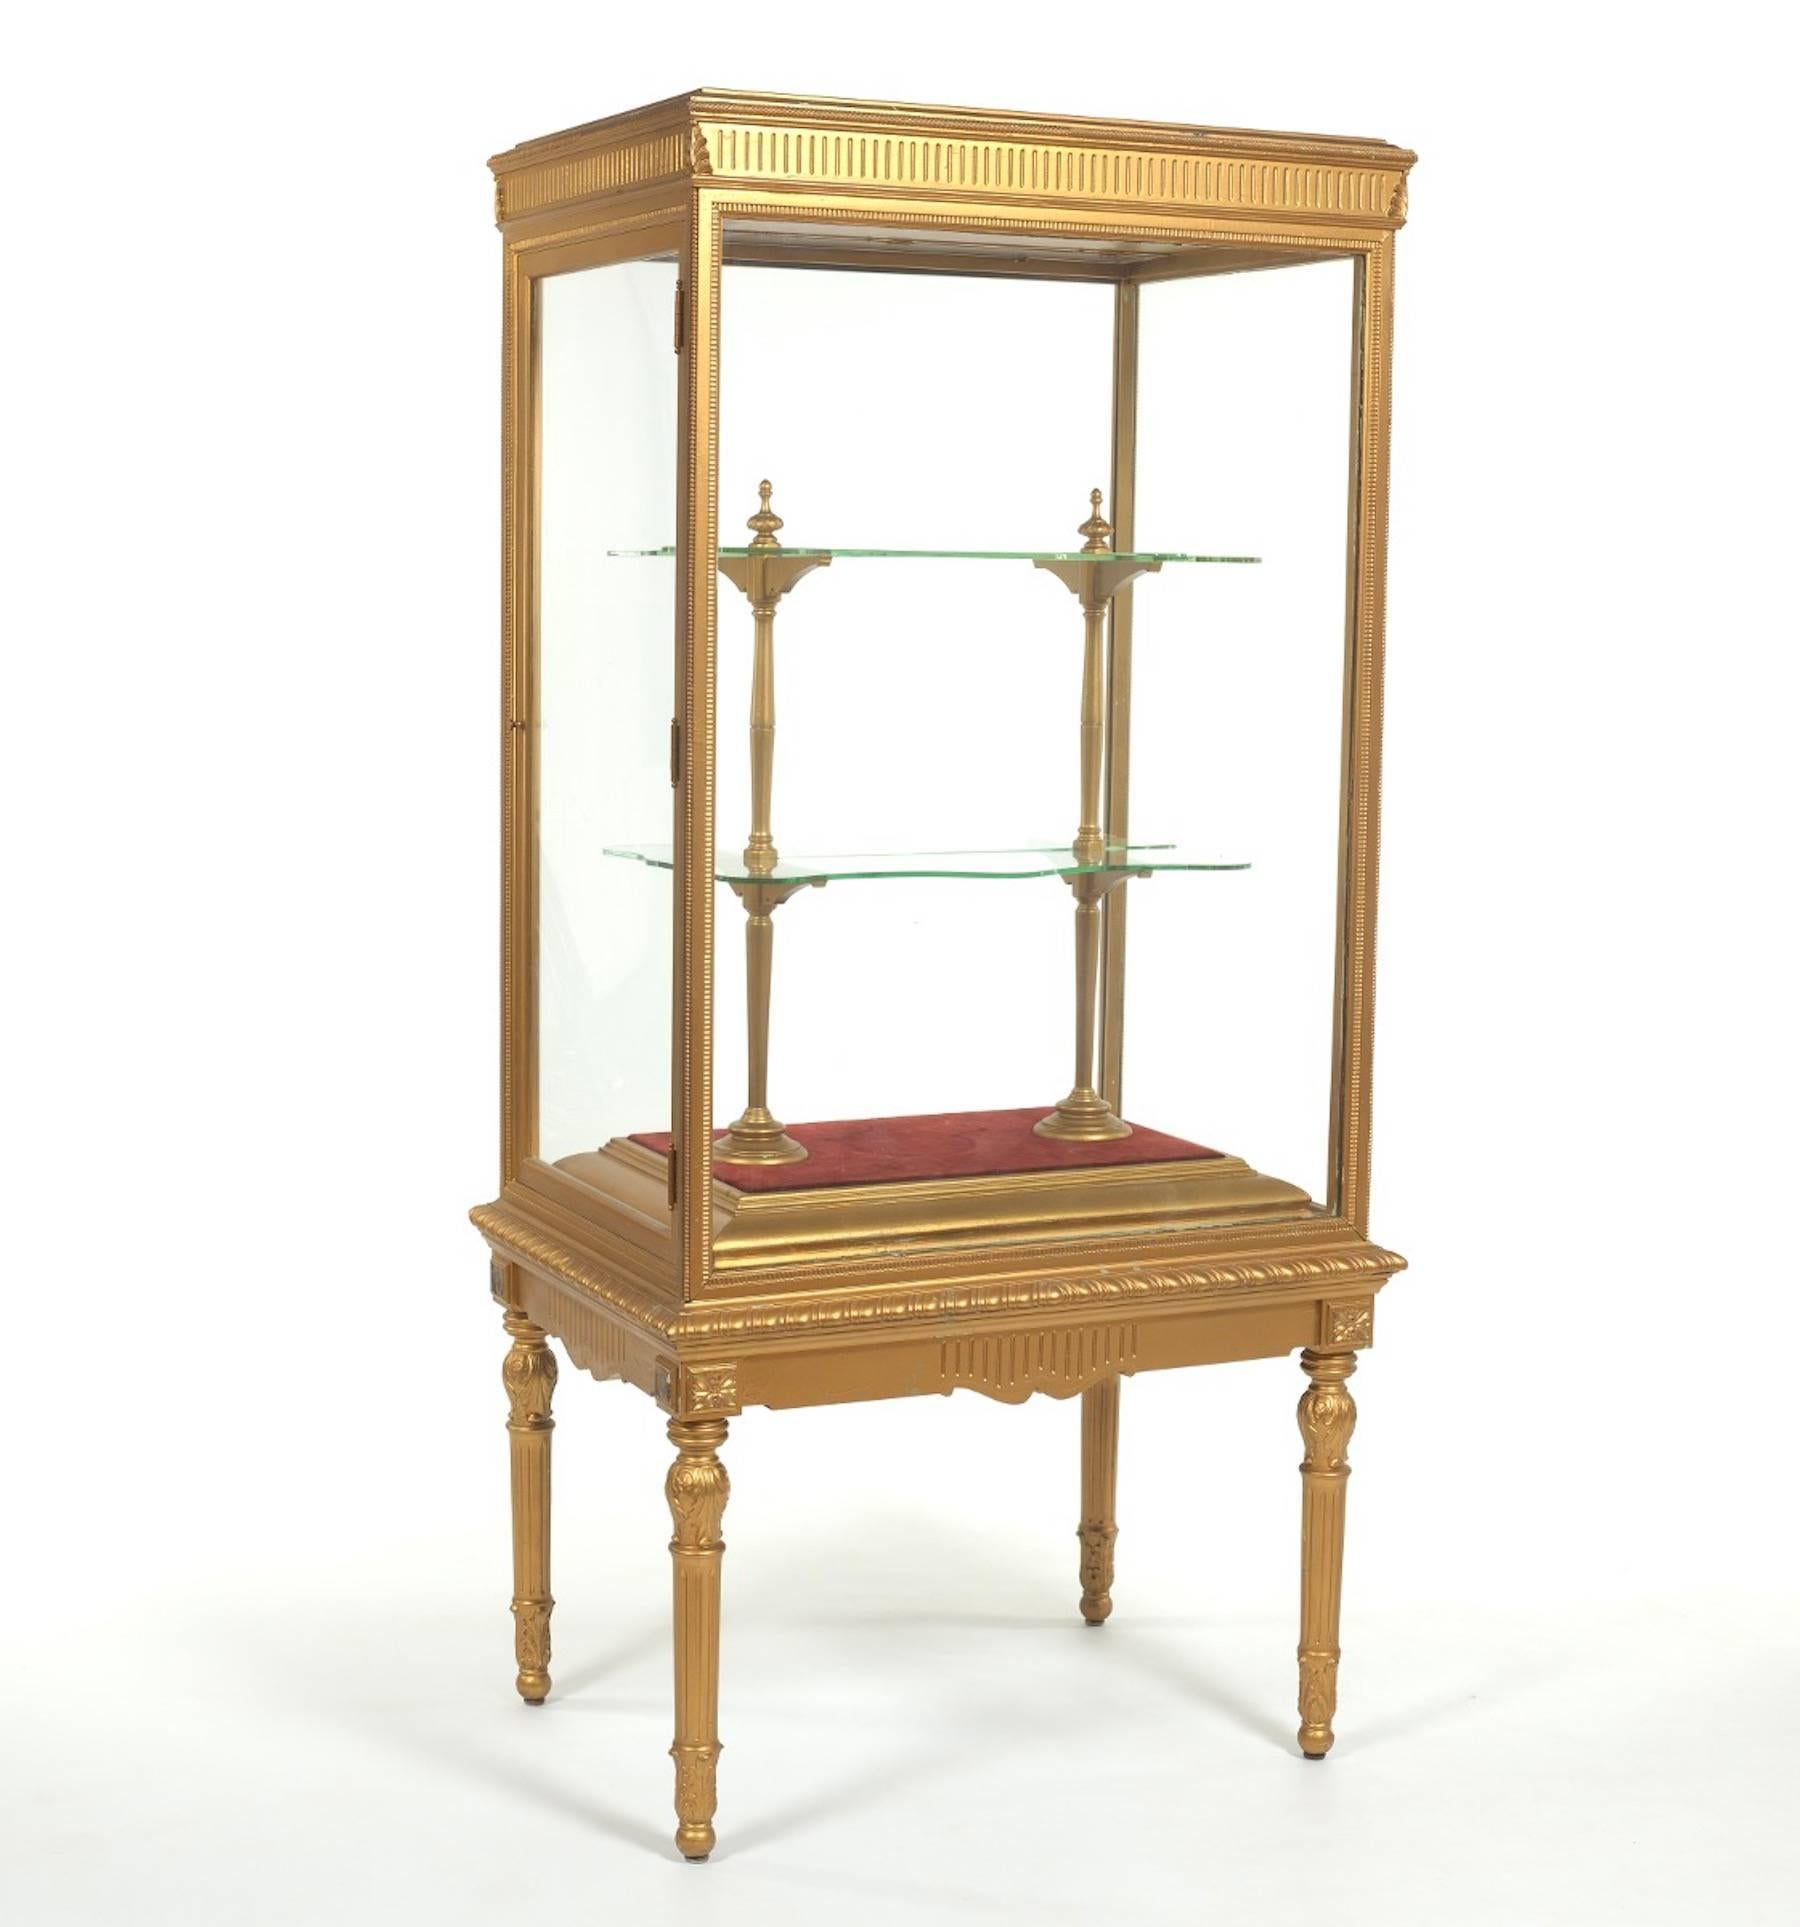 Pair of French neoclassical giltwood standing cabinets or vitrines, each one of excellent proportions, with four interior serpentine glass shelves, encased in a neoclassic carved giltwood case with one side door, raised on tapering reeded legs.